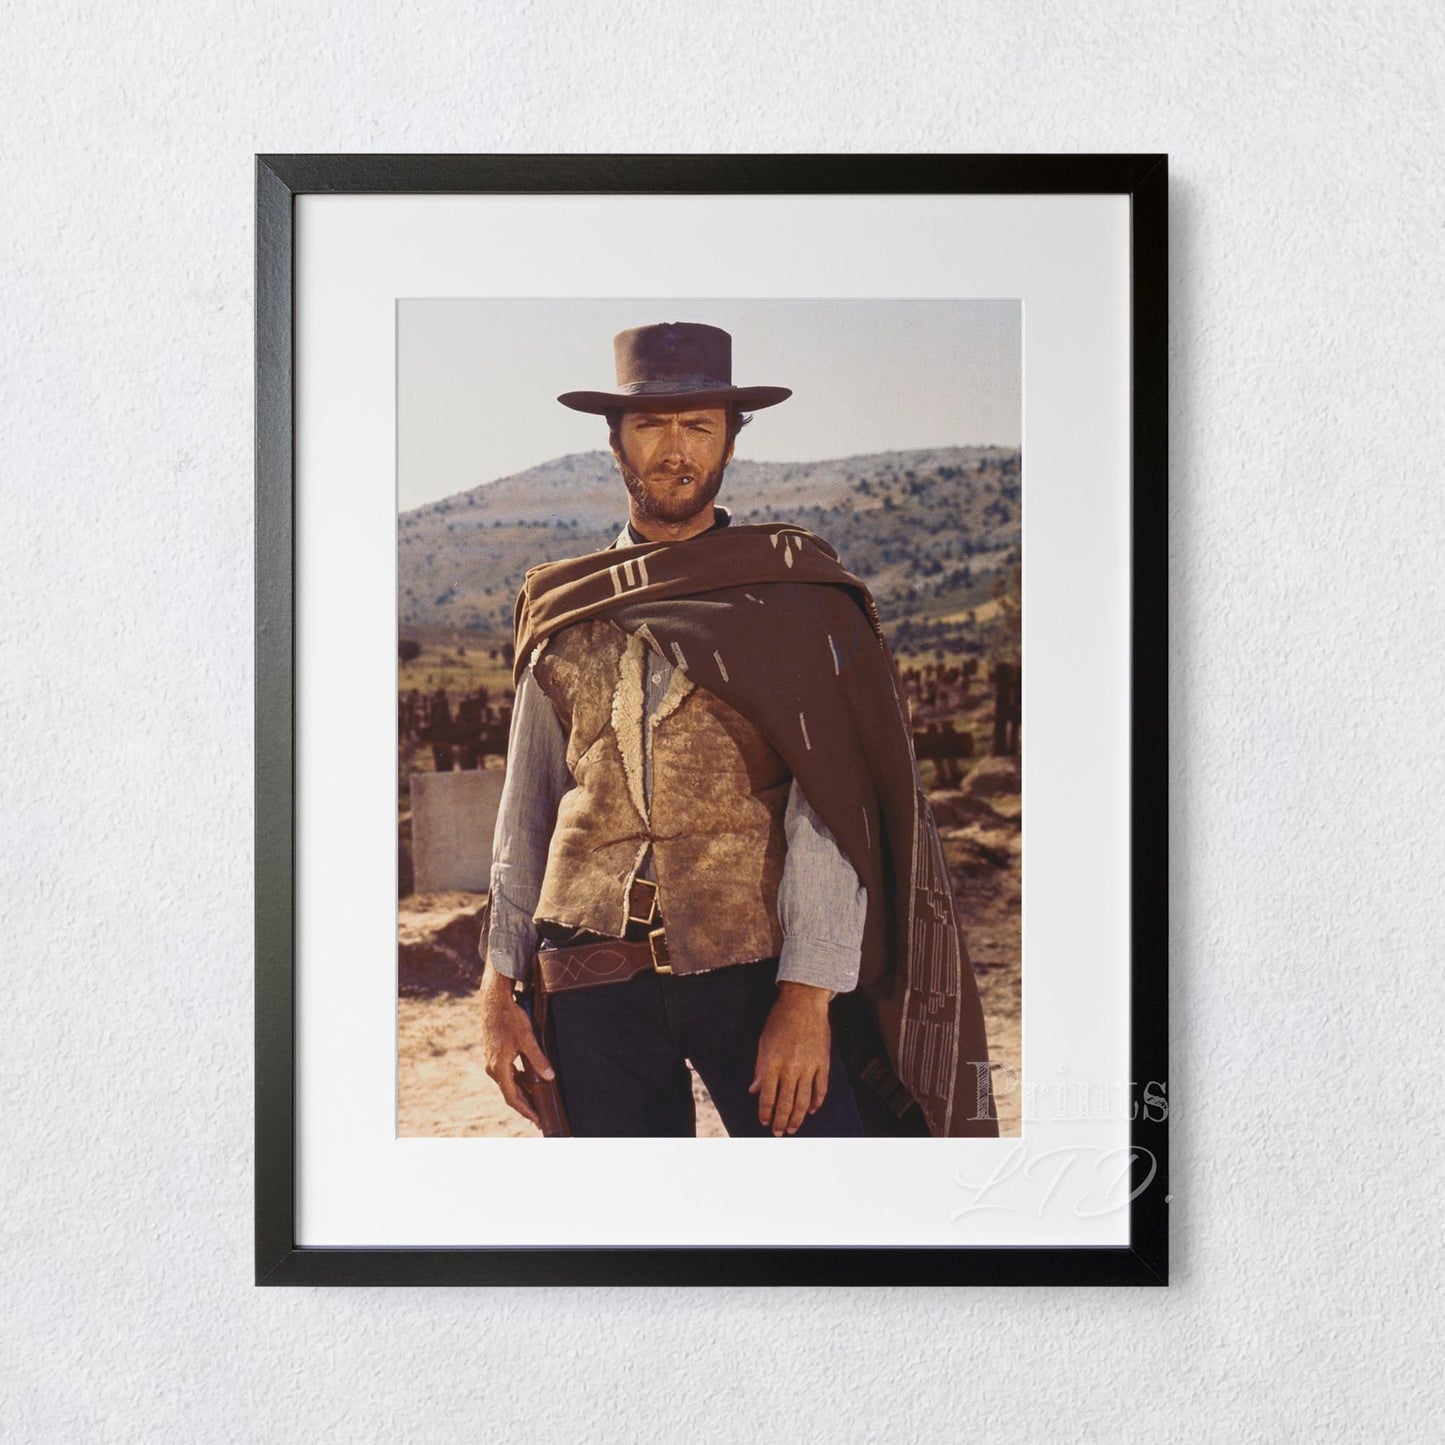 Clint Eastwood in The Good, The Bad, And The Ugly